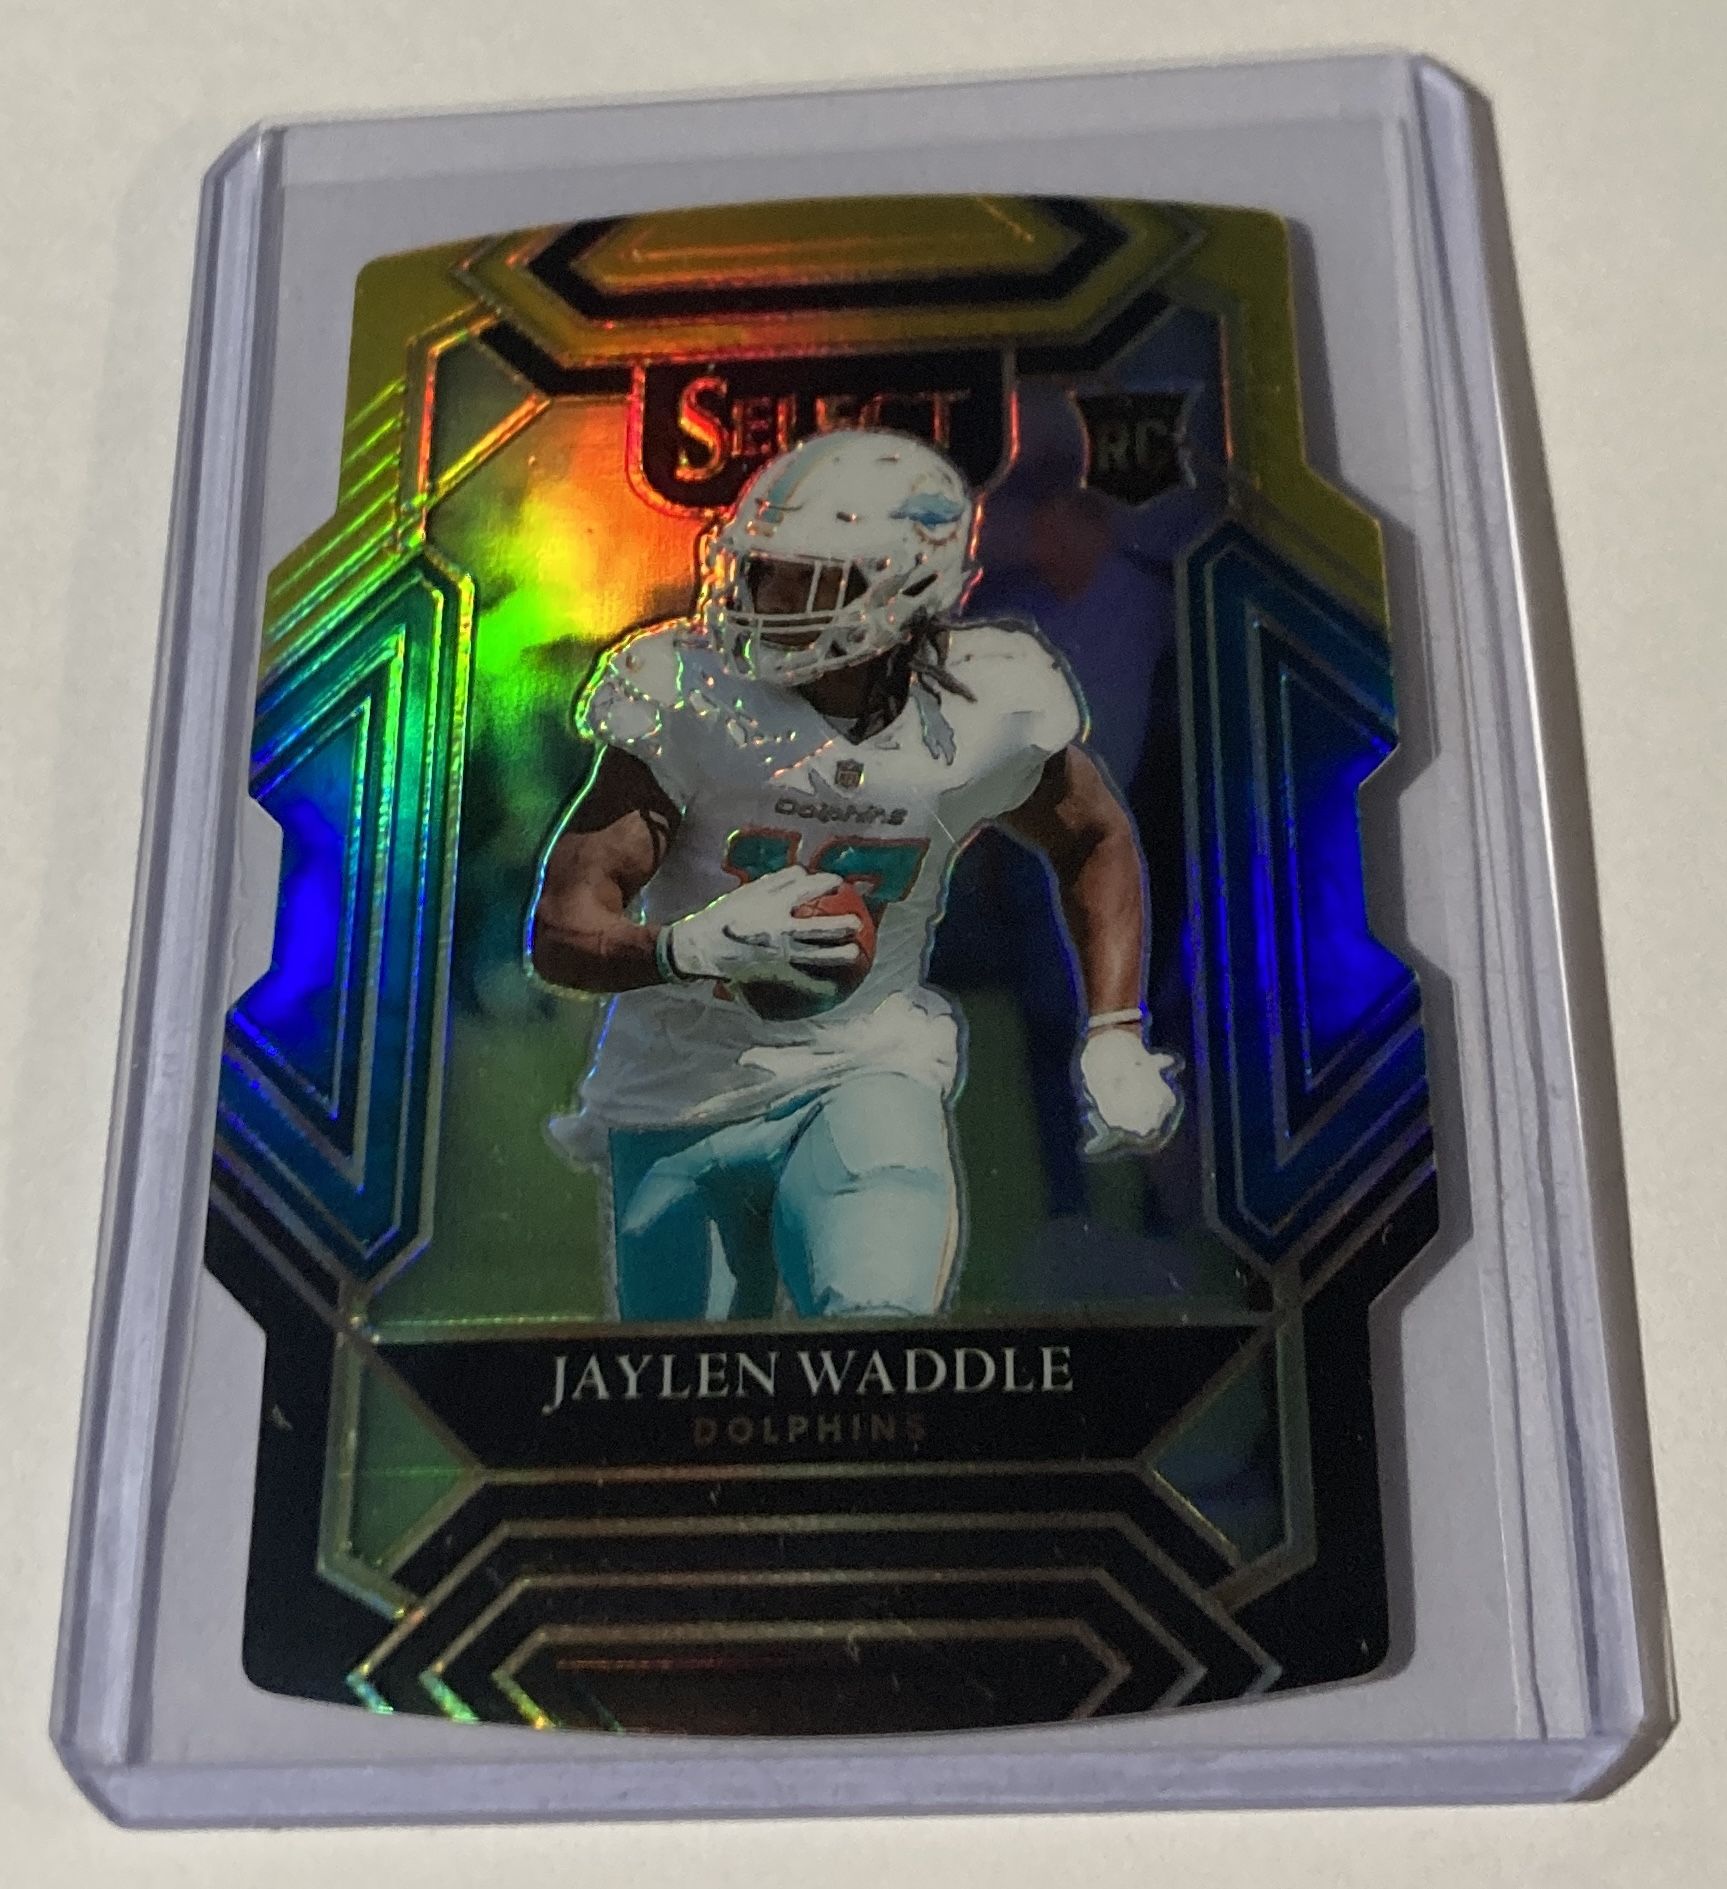 Jaylen Waddle Black Gold Rookie Card 2021 Select Football Miami Dolphins